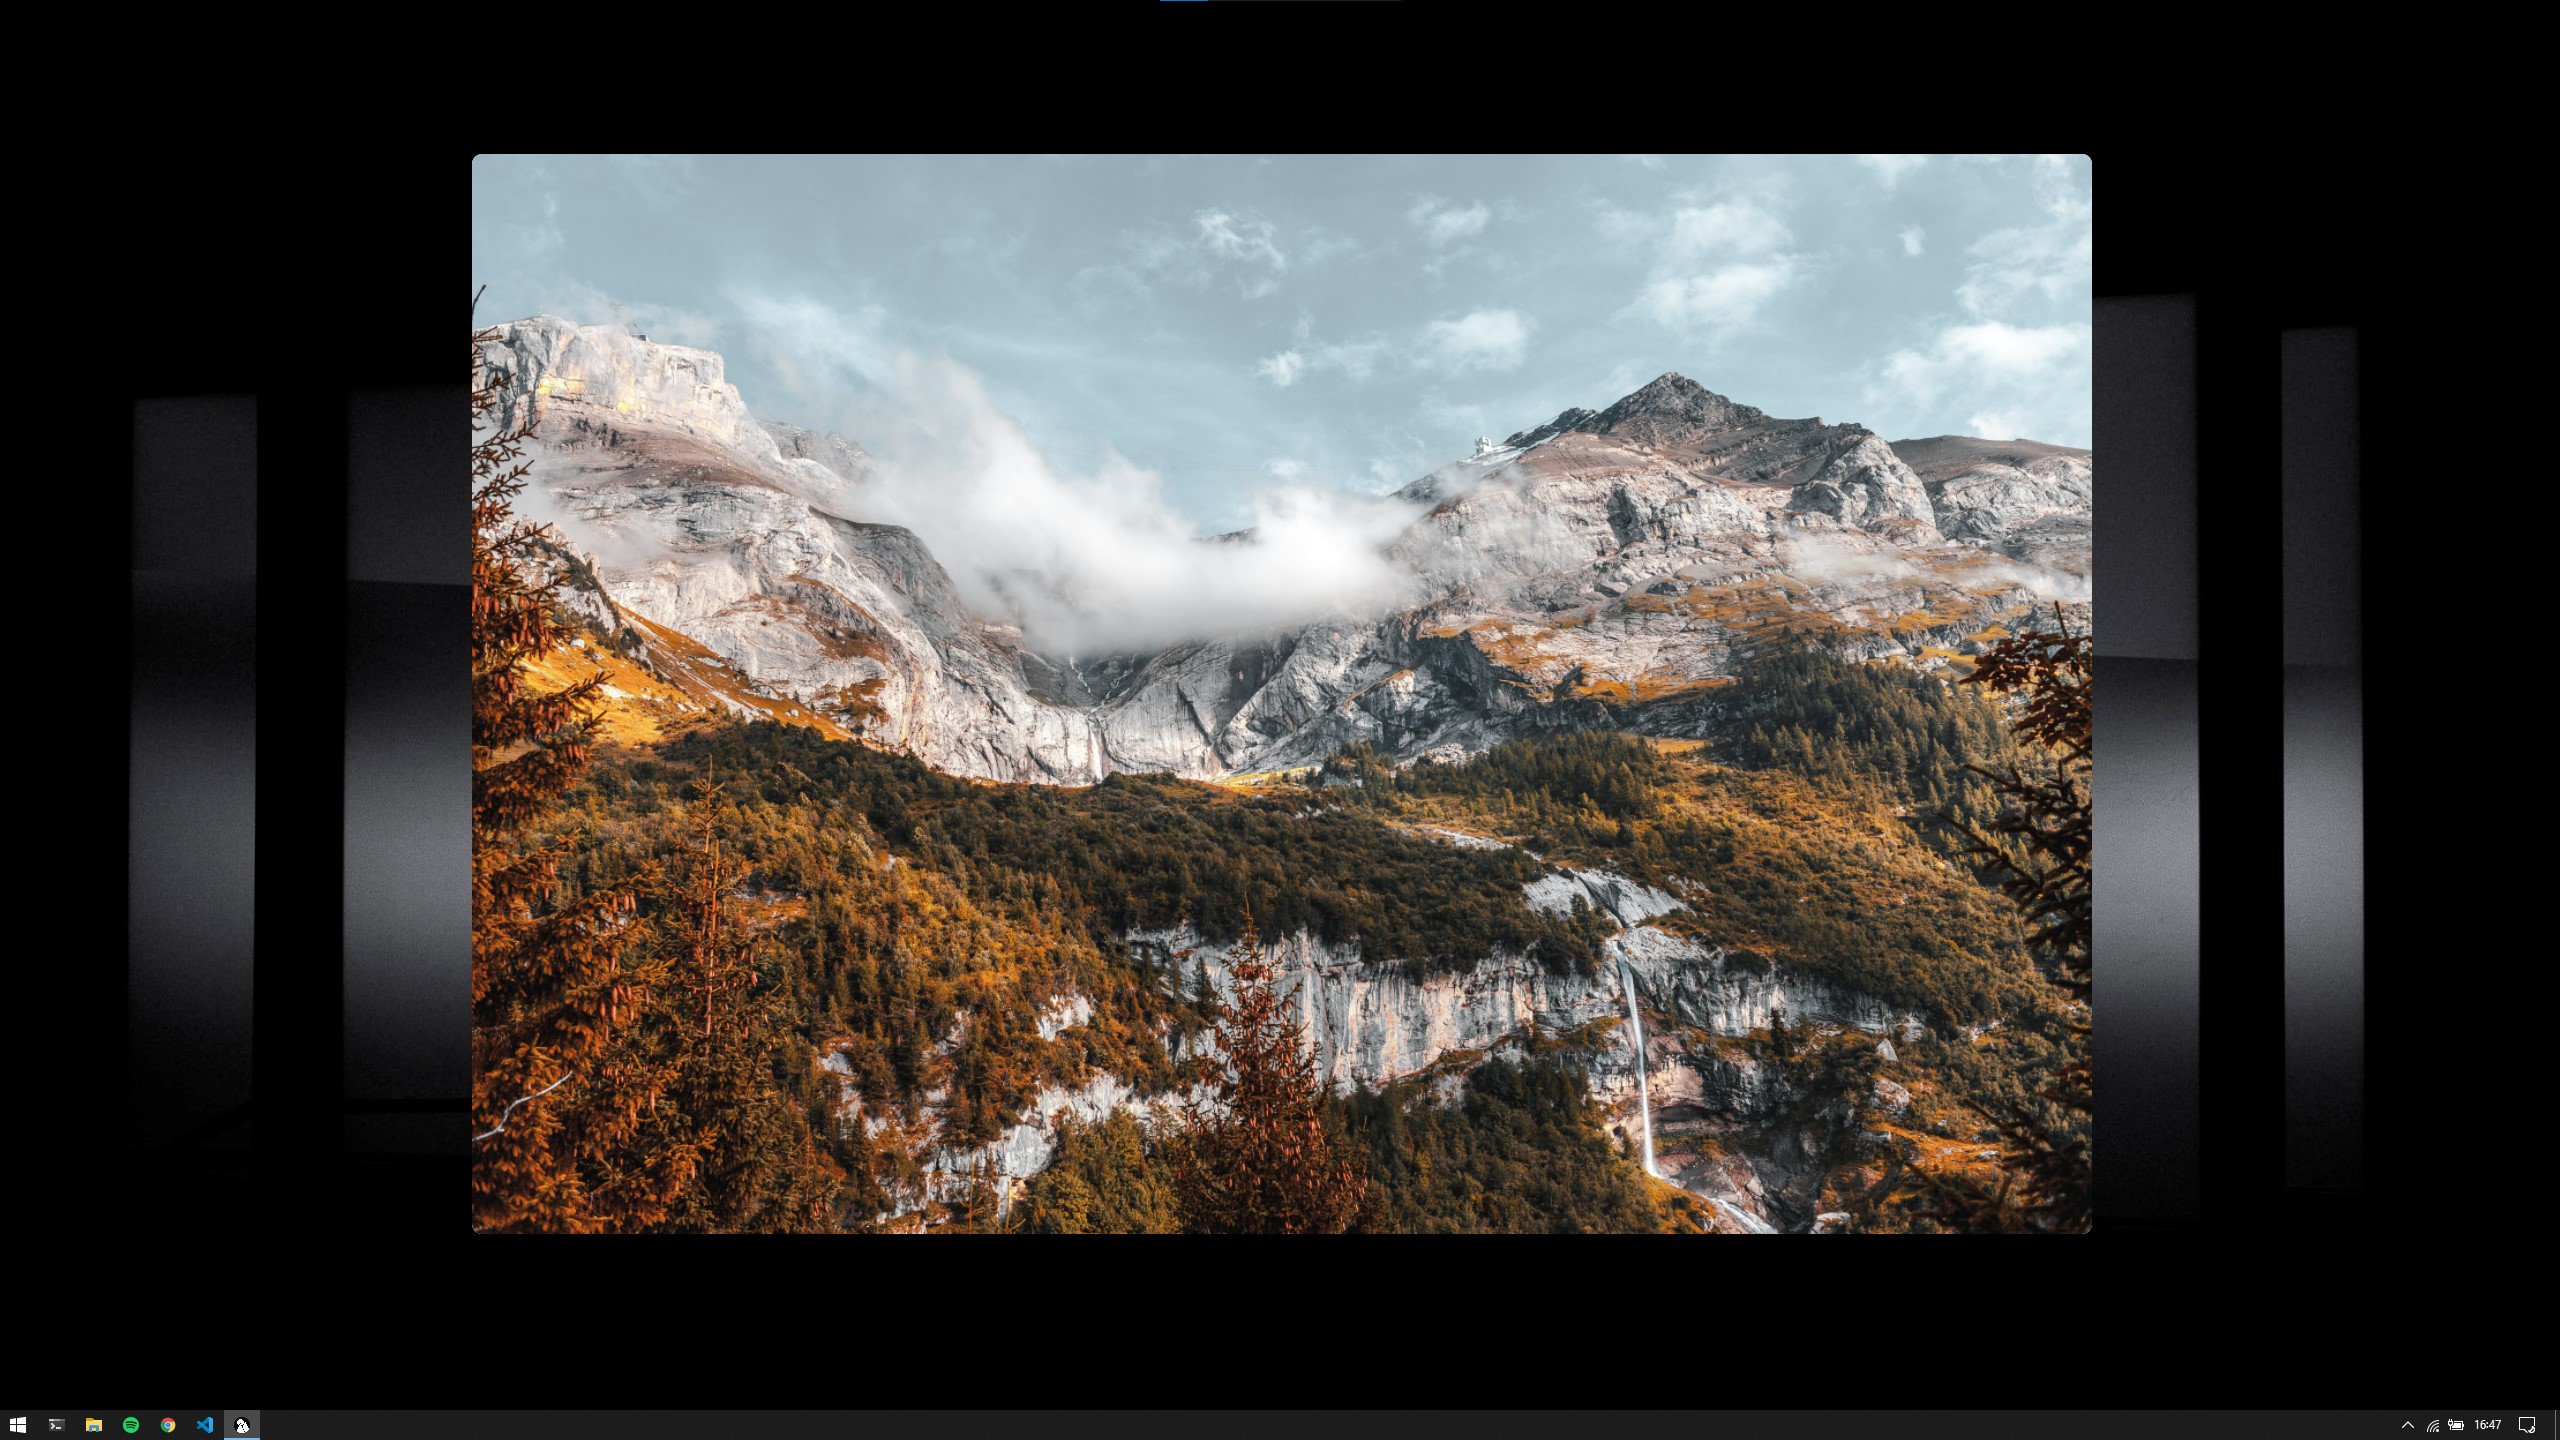 Shows a desktop with a window with curved corners and no border in the center displaying a mountain image.